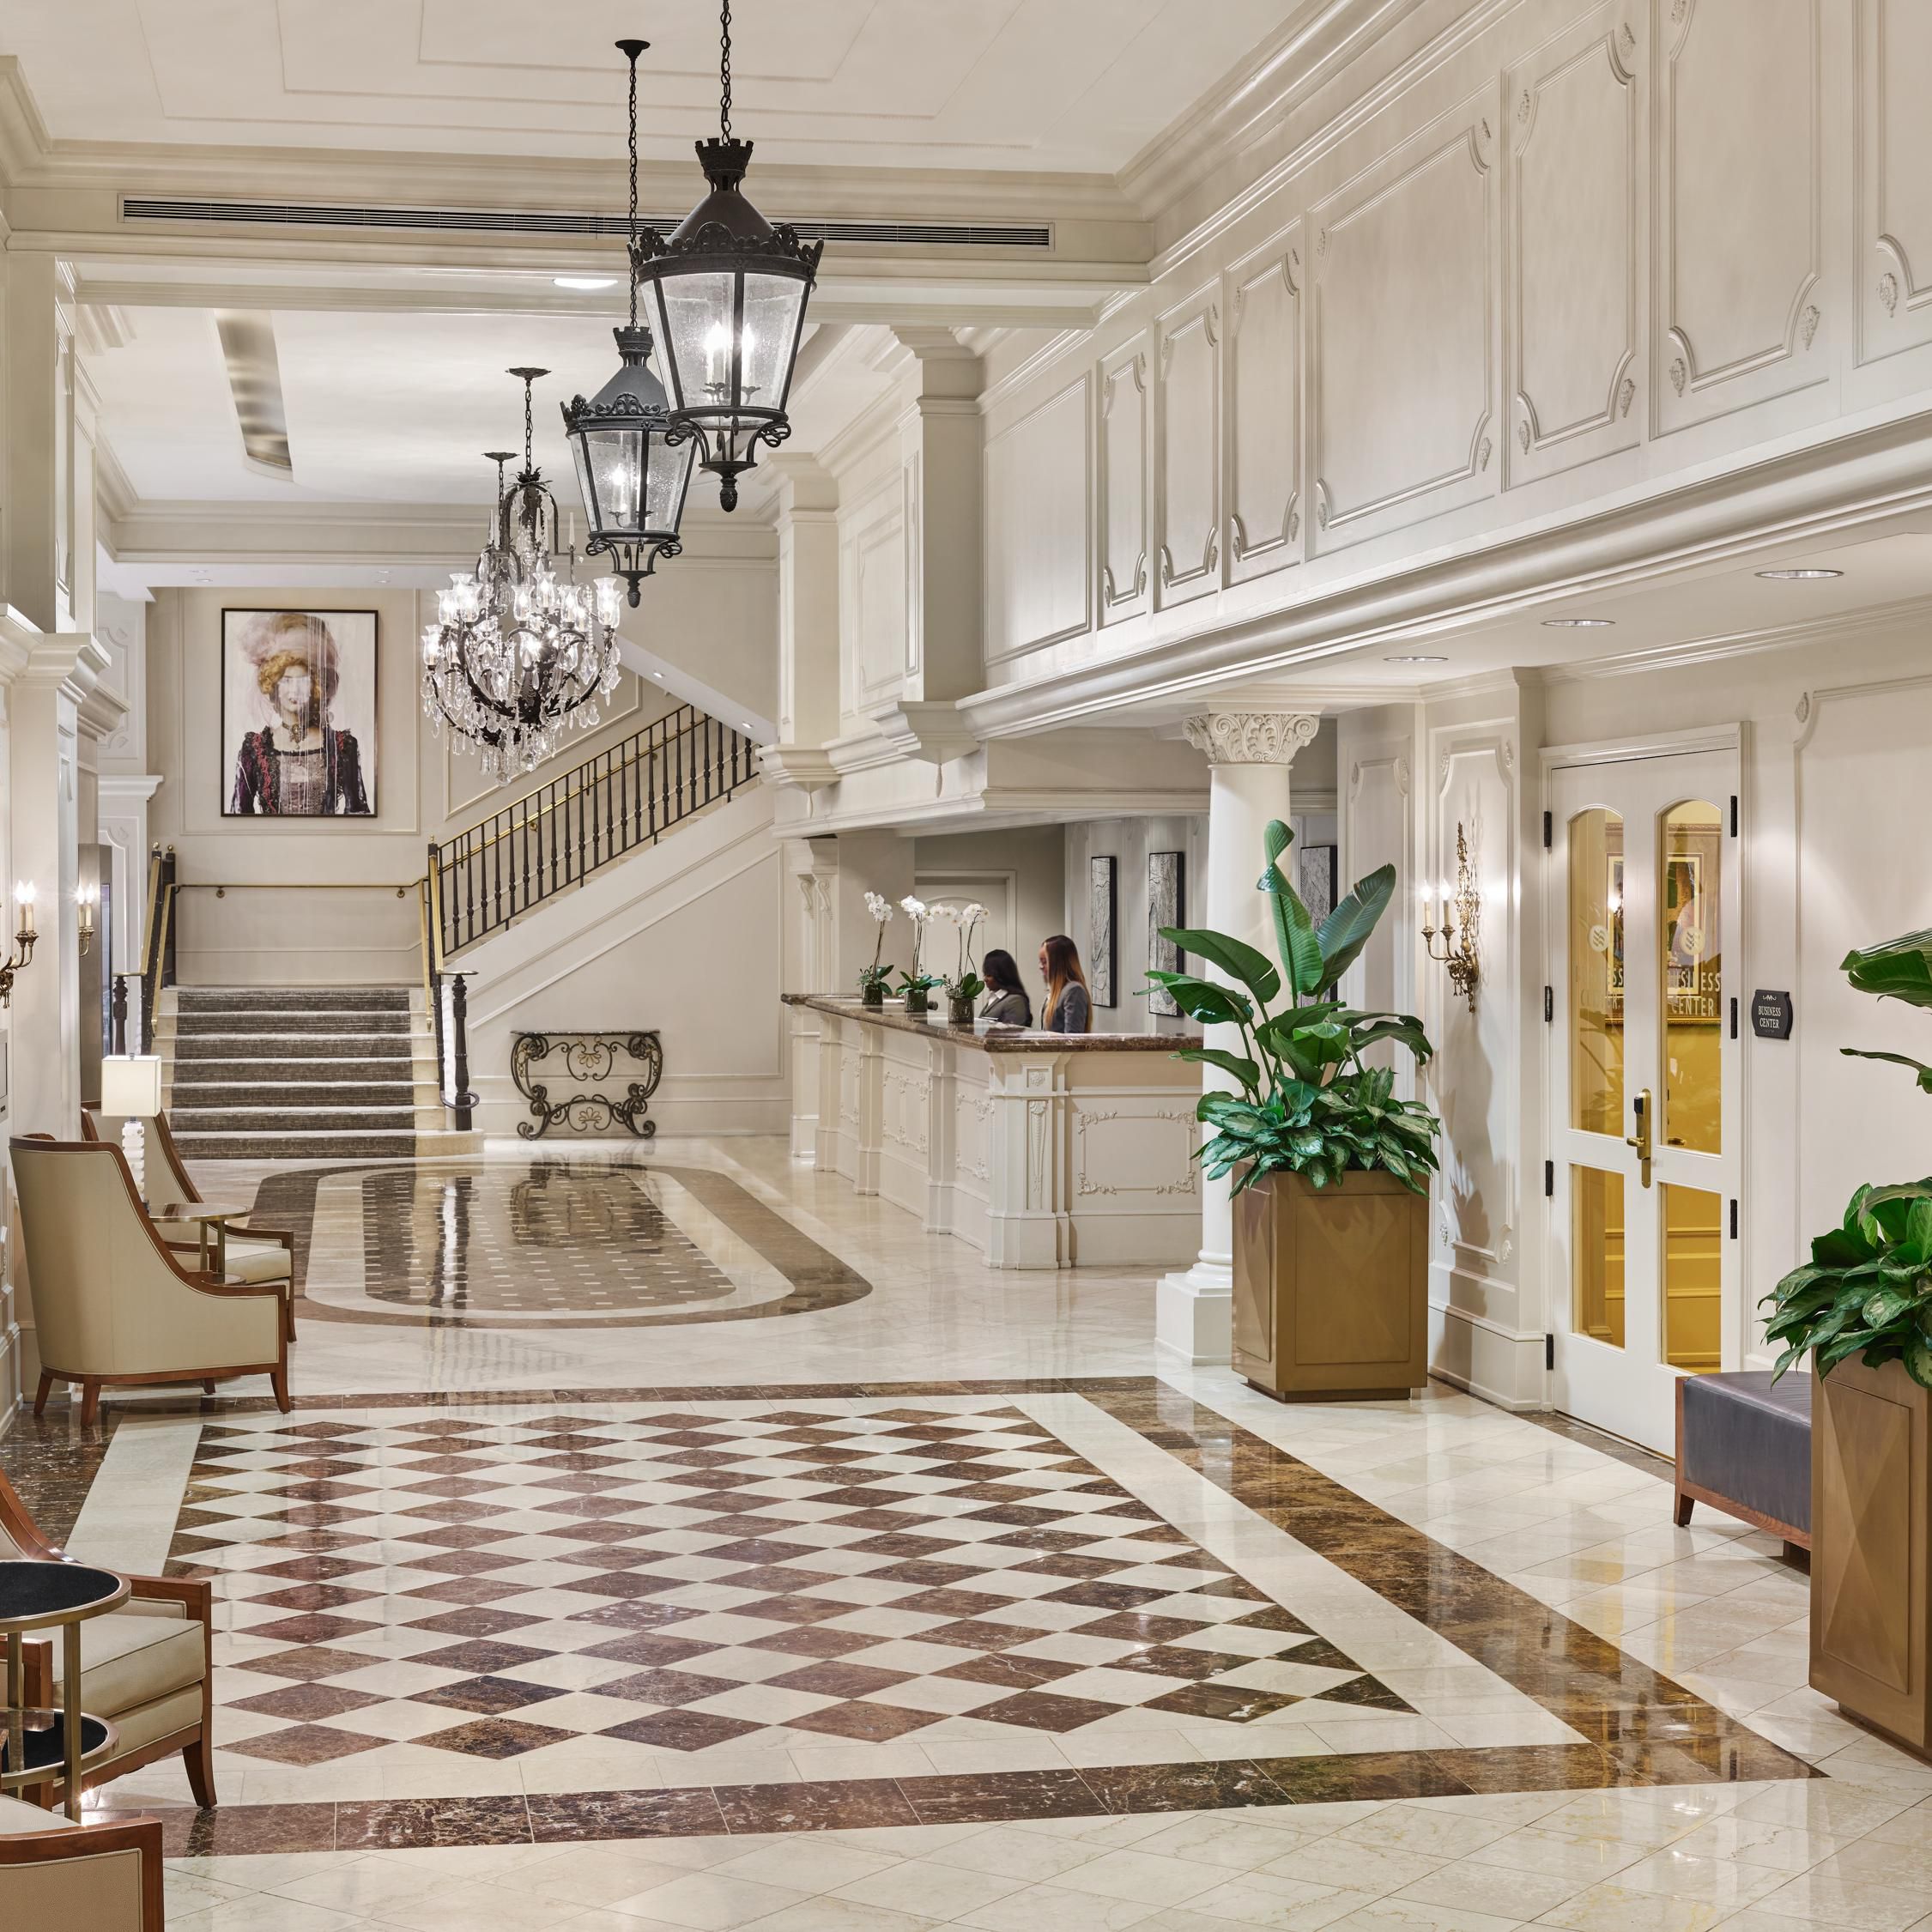 Welcome to the Crowne Plaza New Orleans French Quarter.